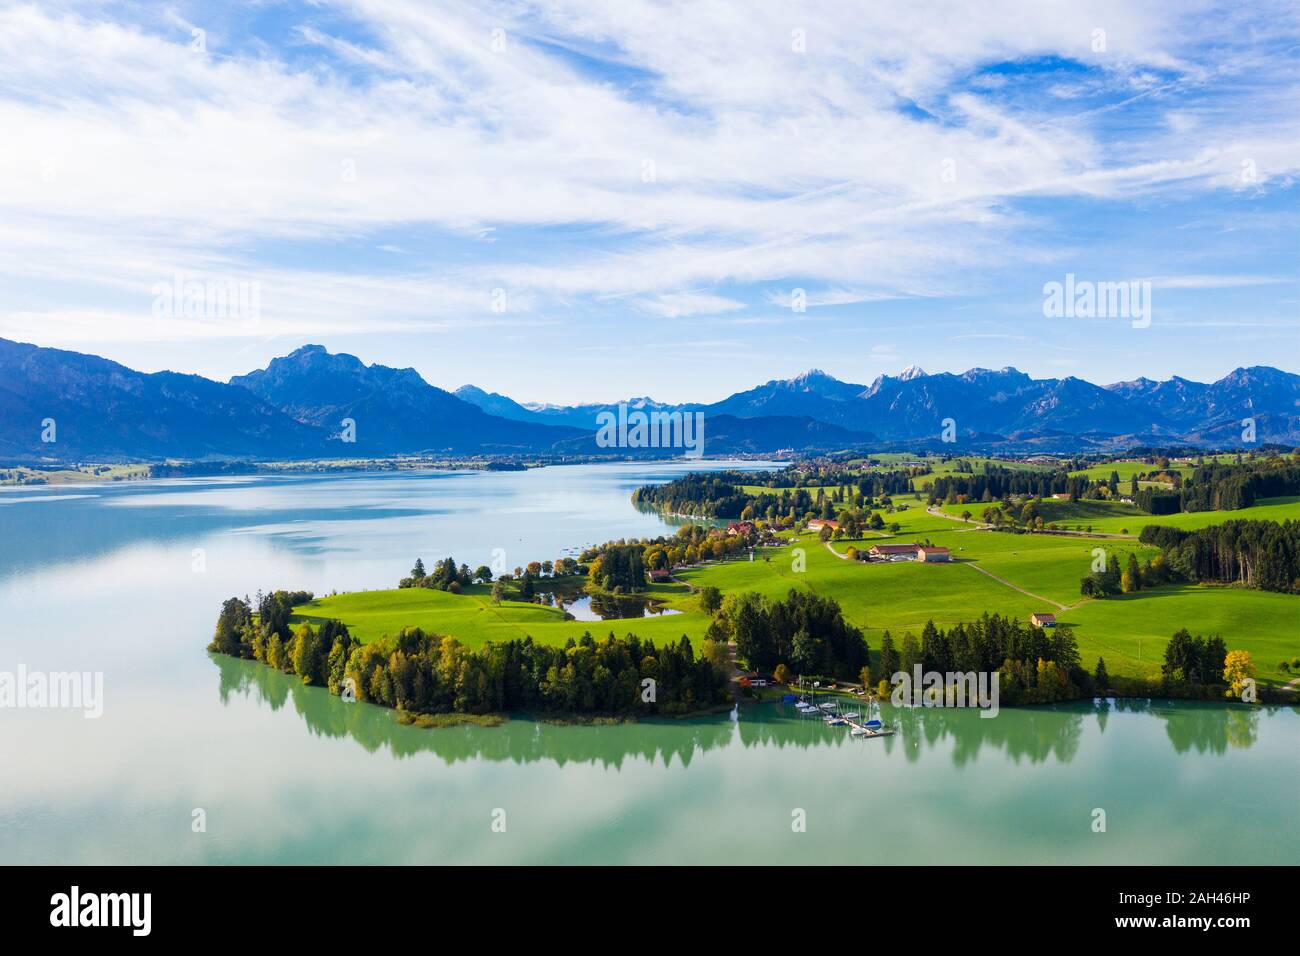 Germany, Bavaria, Dietringen, Aerial view of Forggensee lake with mountains in background Stock Photo